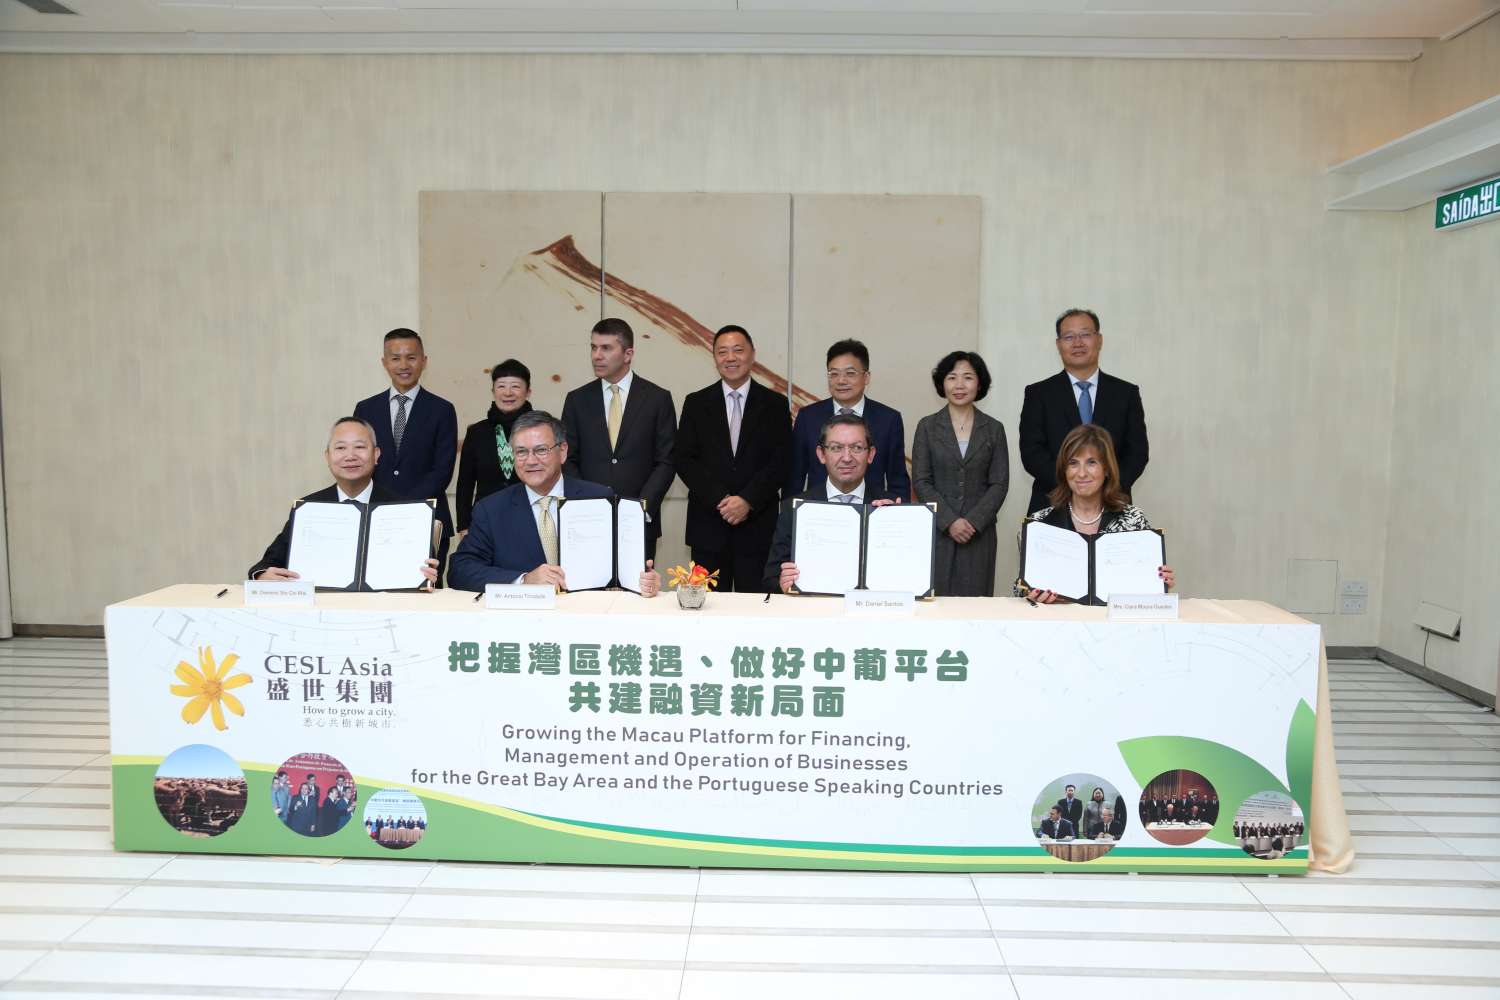 CESL Asia Agreements Signing Ceremony (2019/03/01)